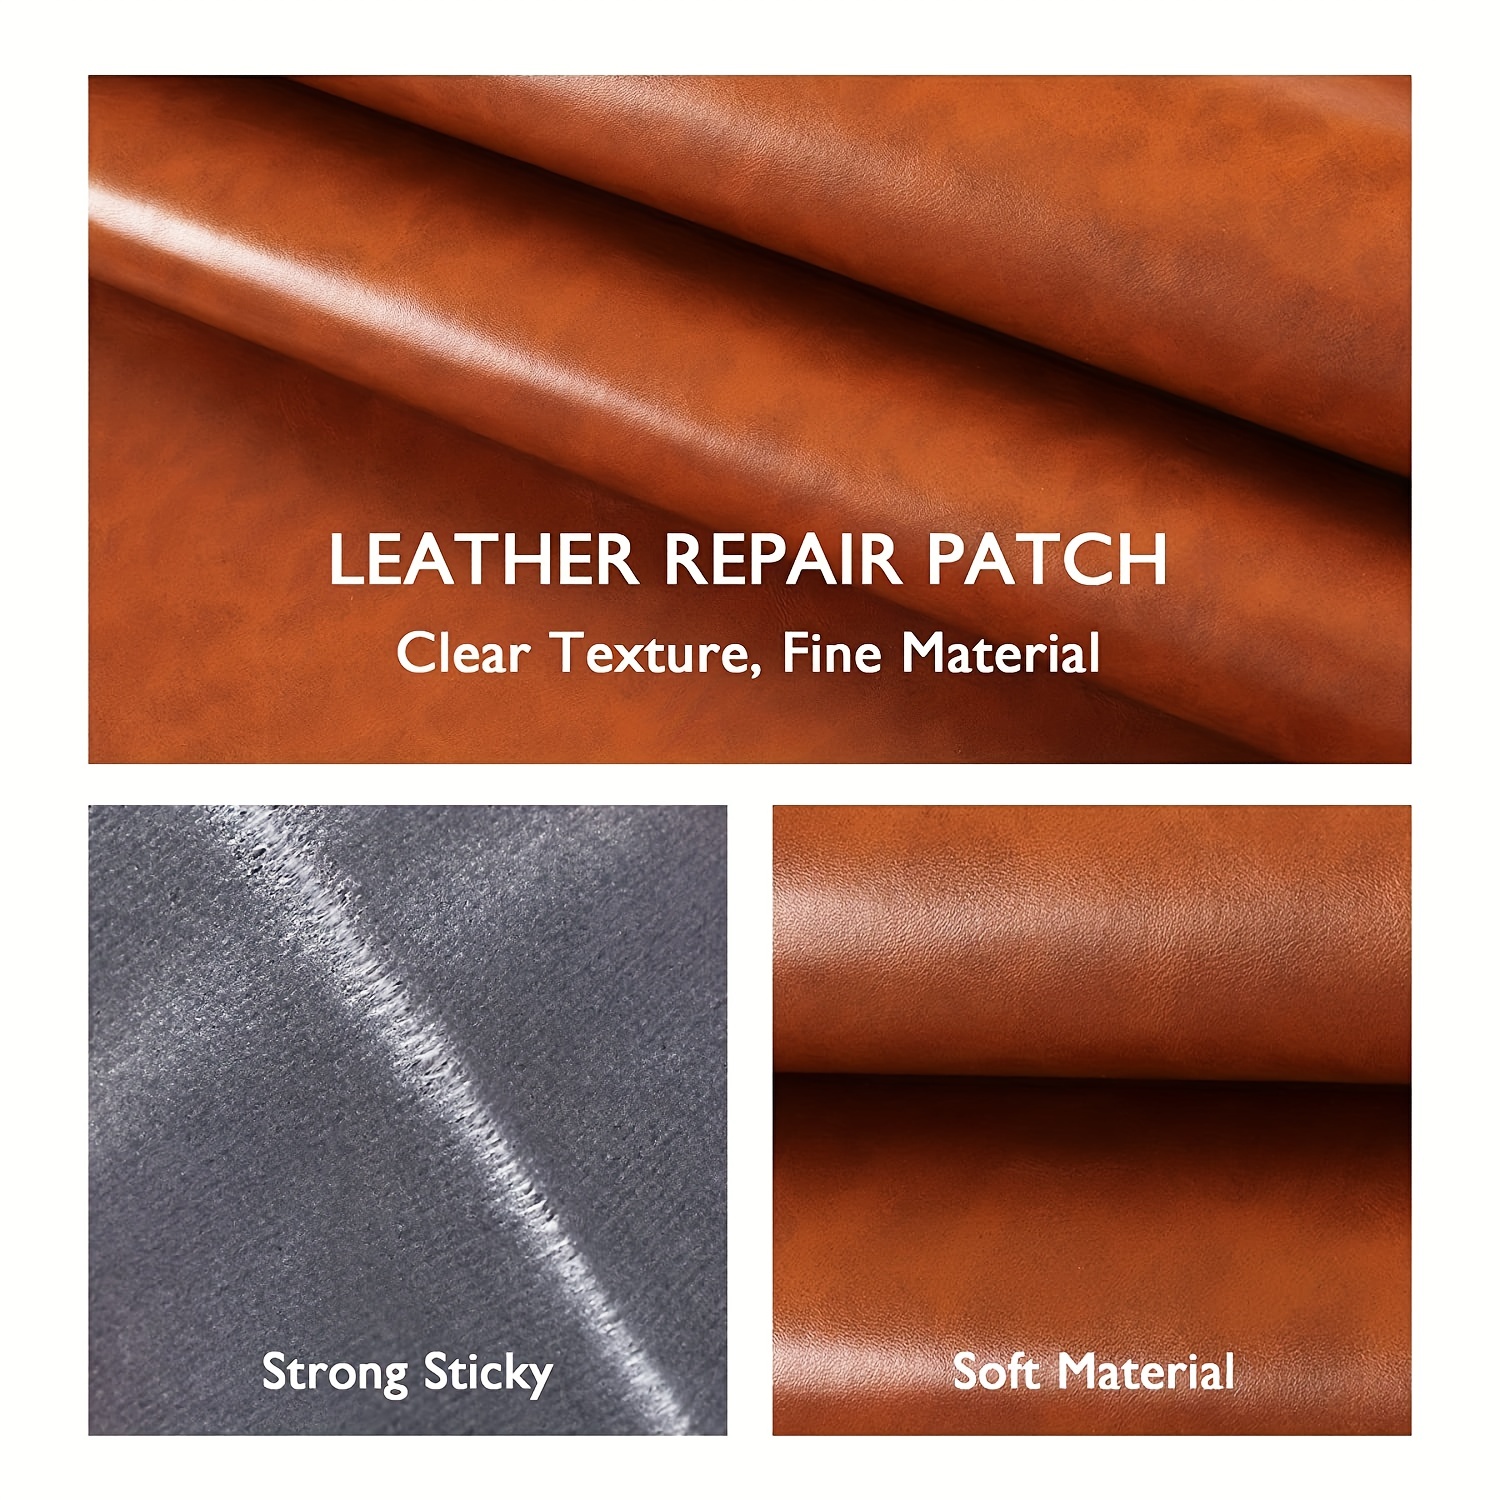 Leather Repair Patch Self Adhesive Sticker Tape